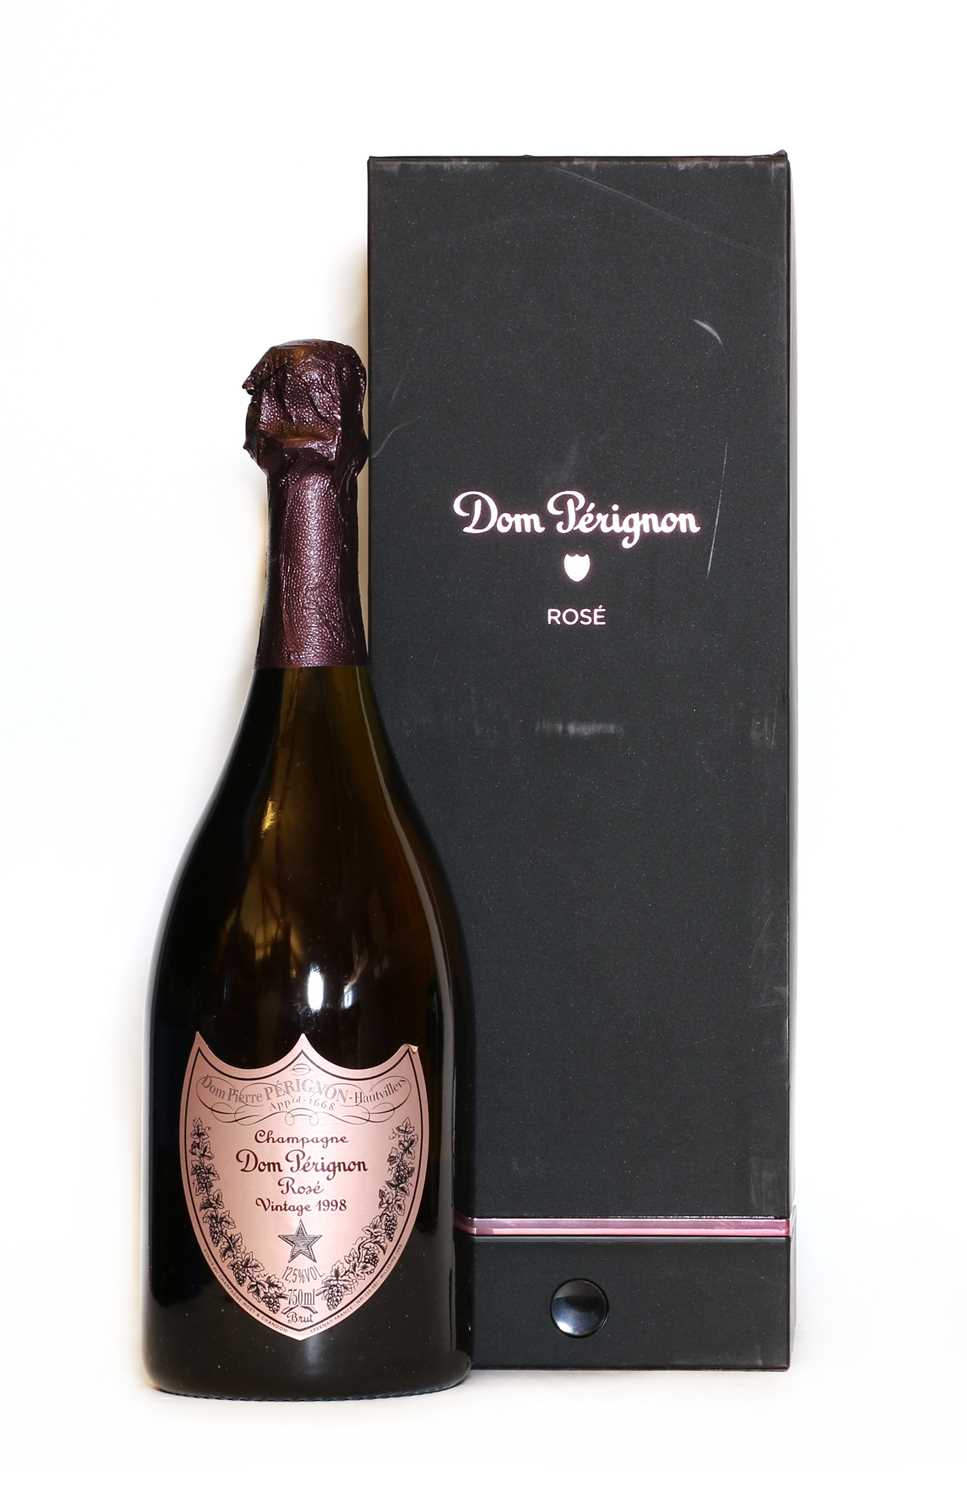 Lot 25 - Moet & Chandon, Epernay, Dom Perignon rose, 1998, boxed (1)